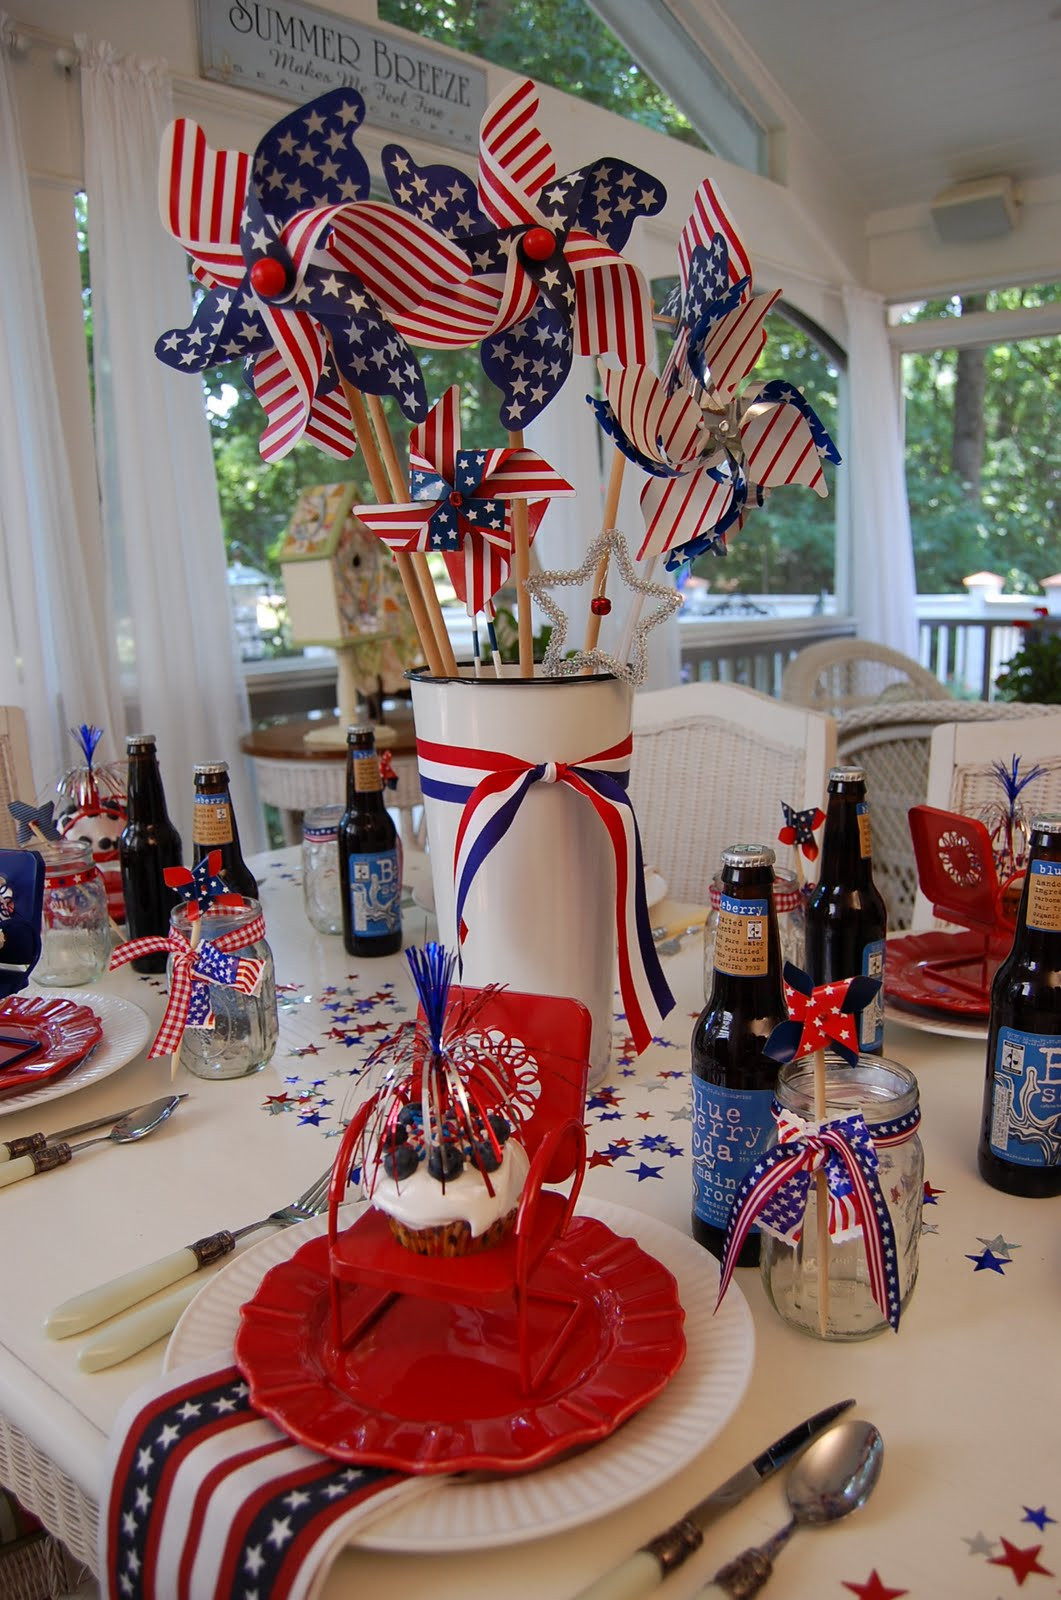 4th Of July Ideas
 A Patriotic Celebration Table Setting